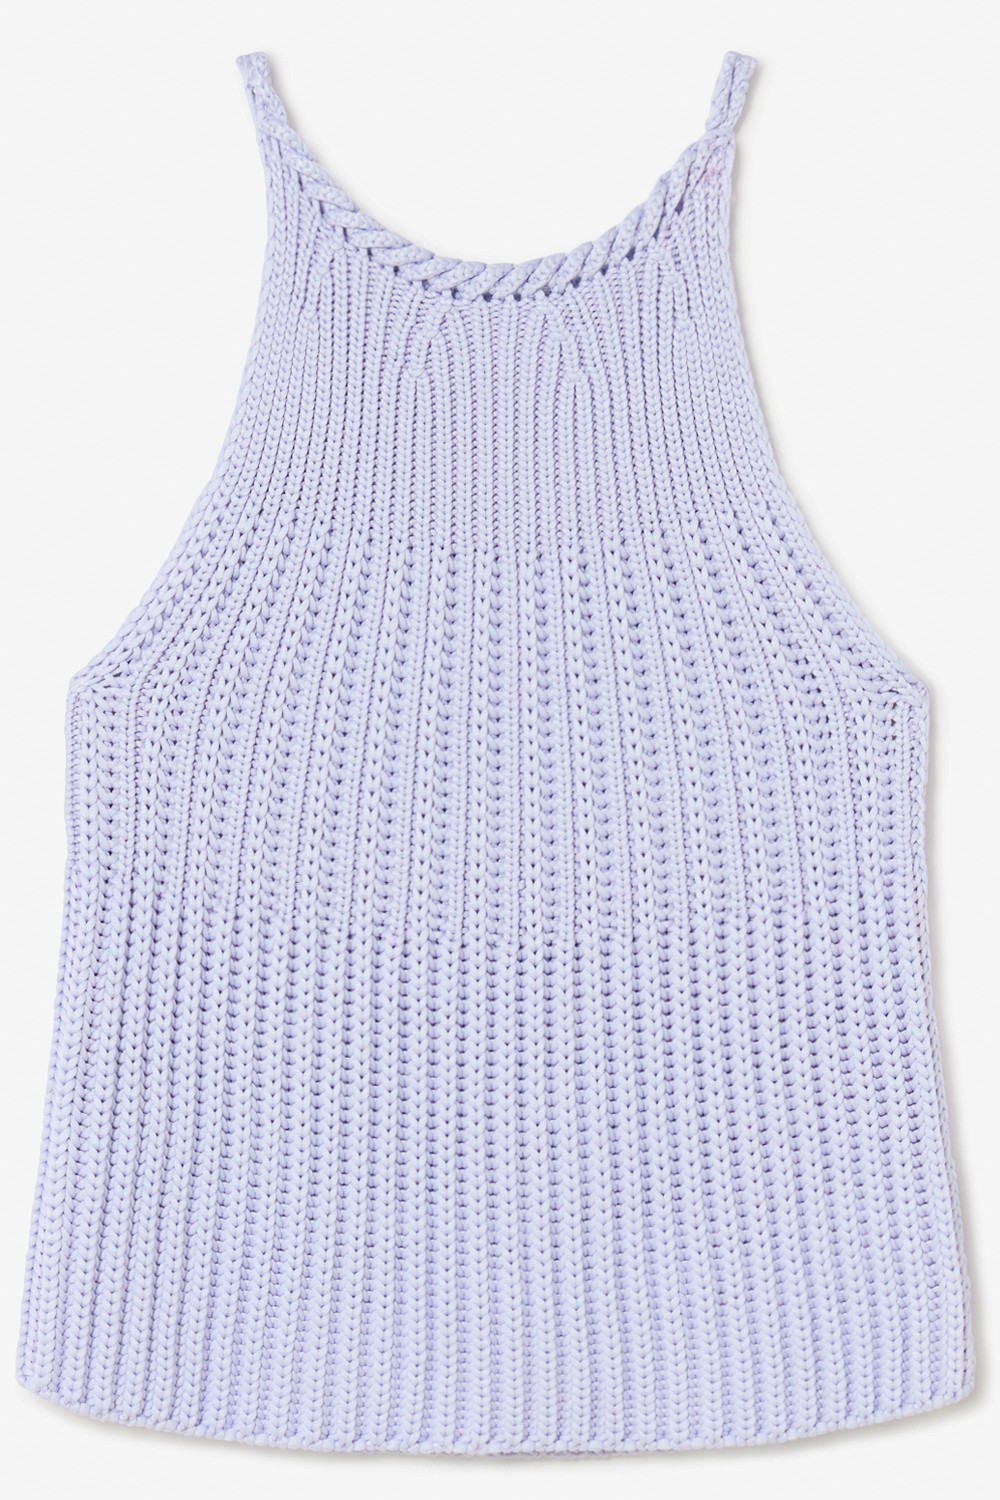 Fully-fashioned halter top